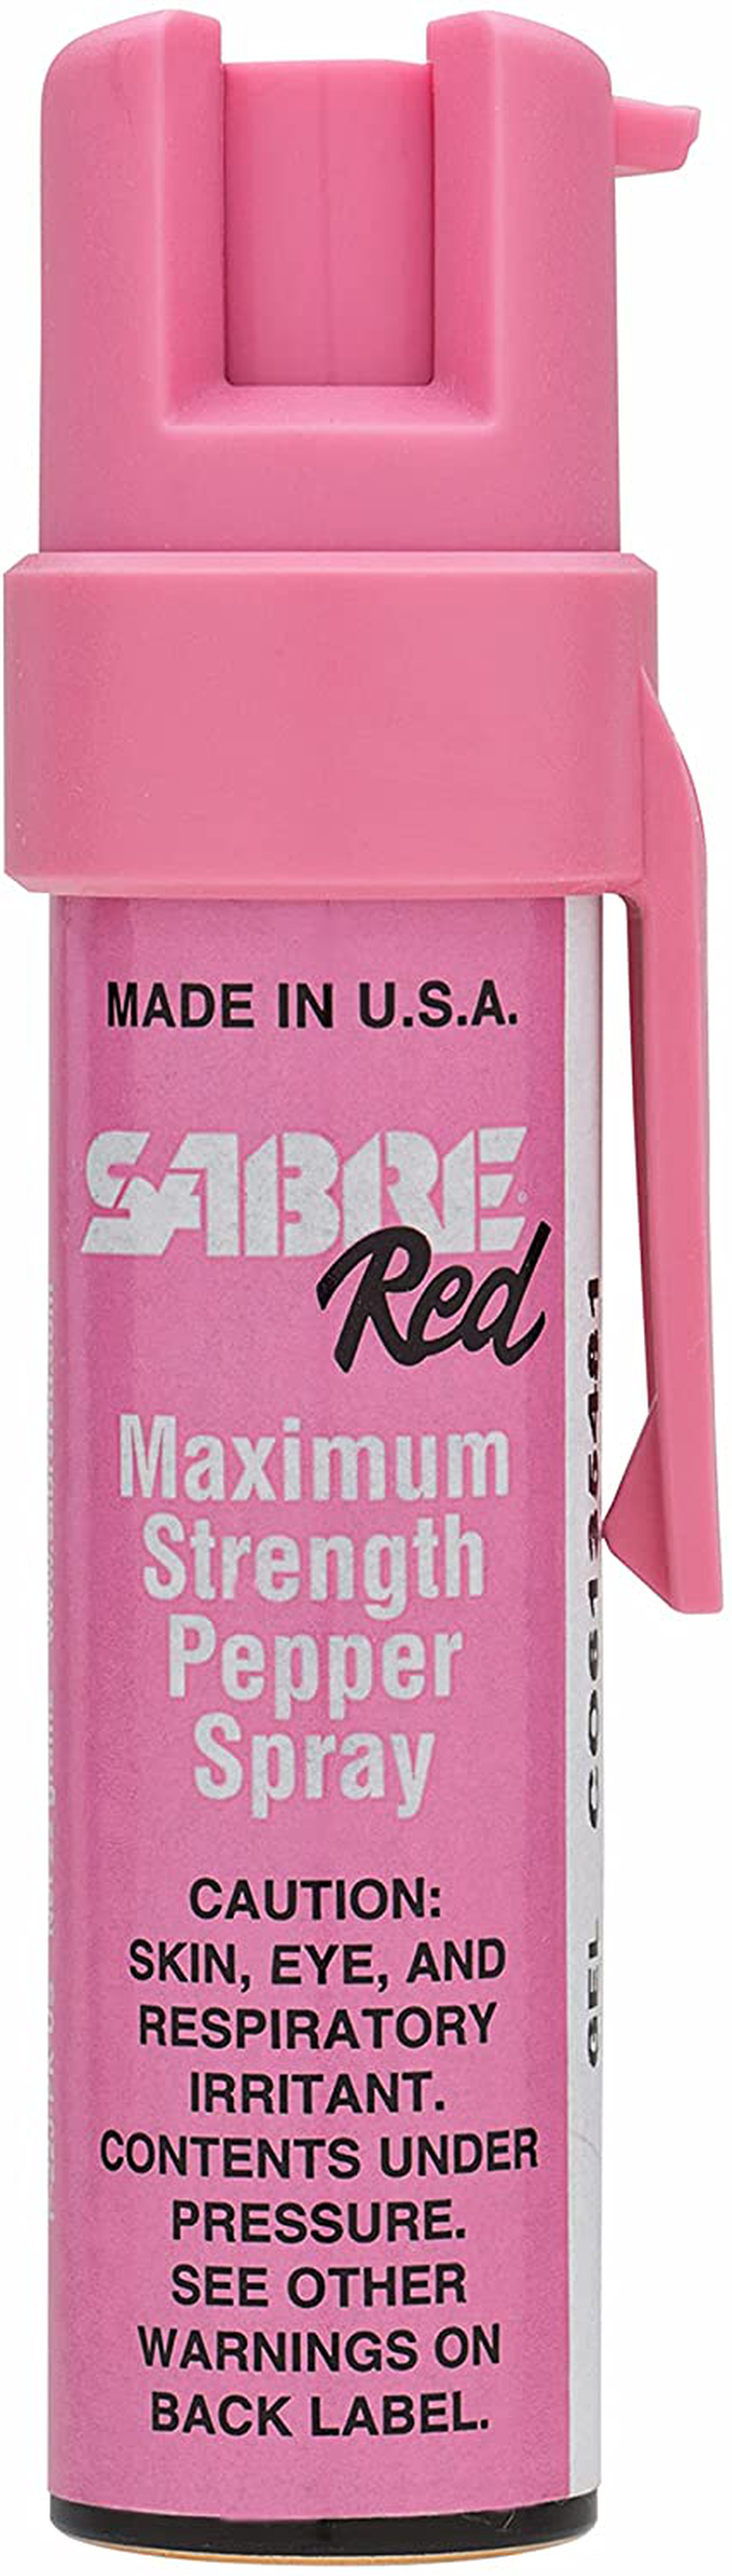 Compact Pepper Spray with Clip – Maximum Police Strength OC Spray with UV Dye, 10-foot (3 m) Range, 35 Bursts, Quick Access Belt Clip – Small and Easy to Carry On-the-Go